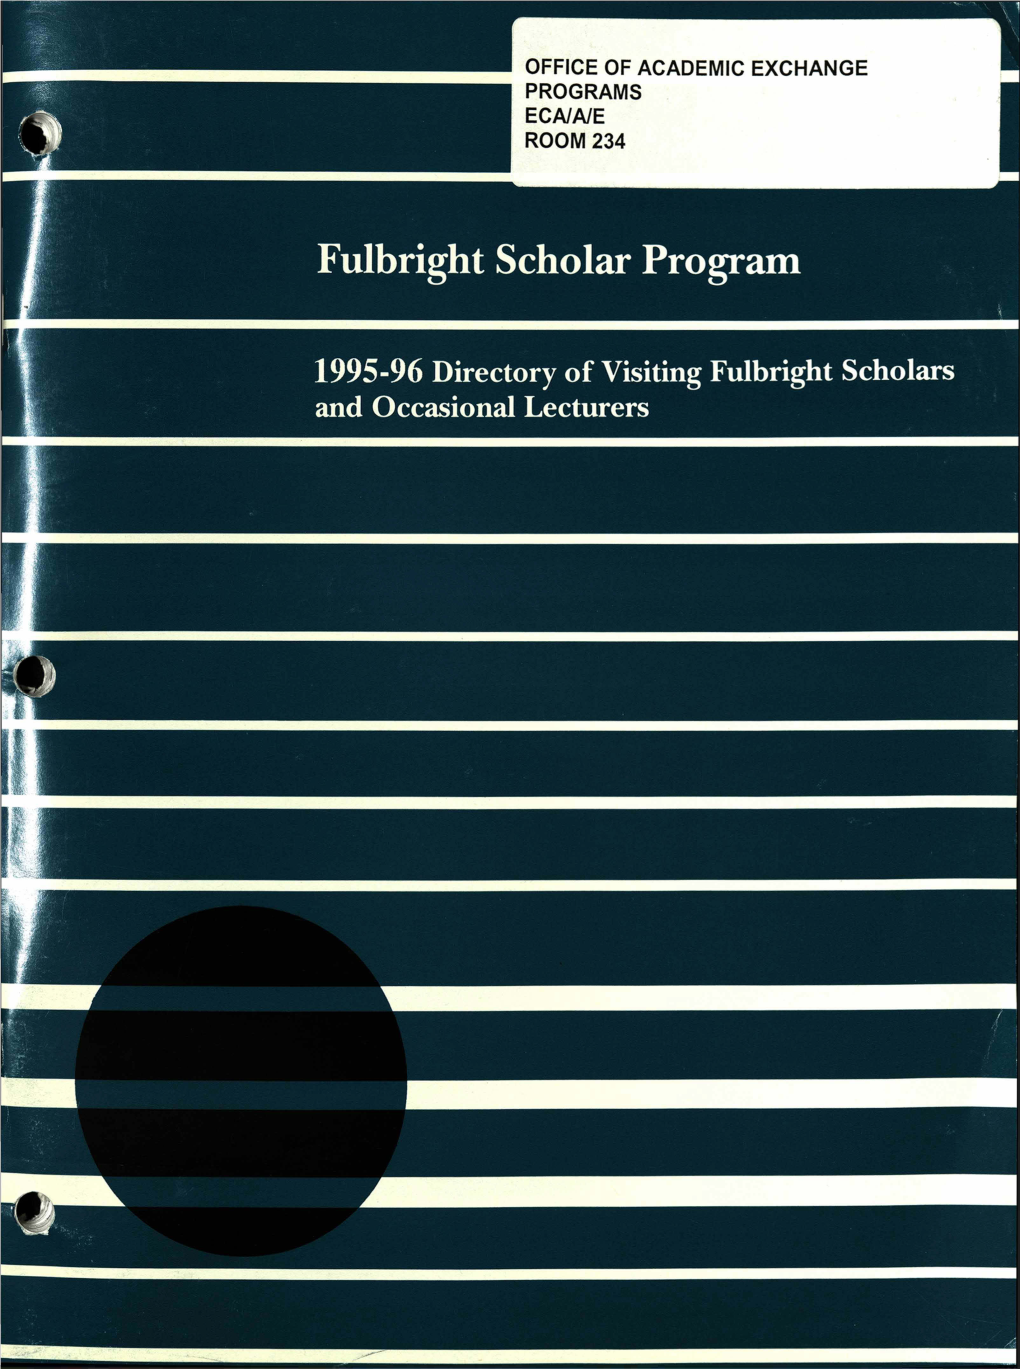 1995-96 Directory of Visiting Fulbright Scholars and Occasional Lecturers Fulbright Scholar Program